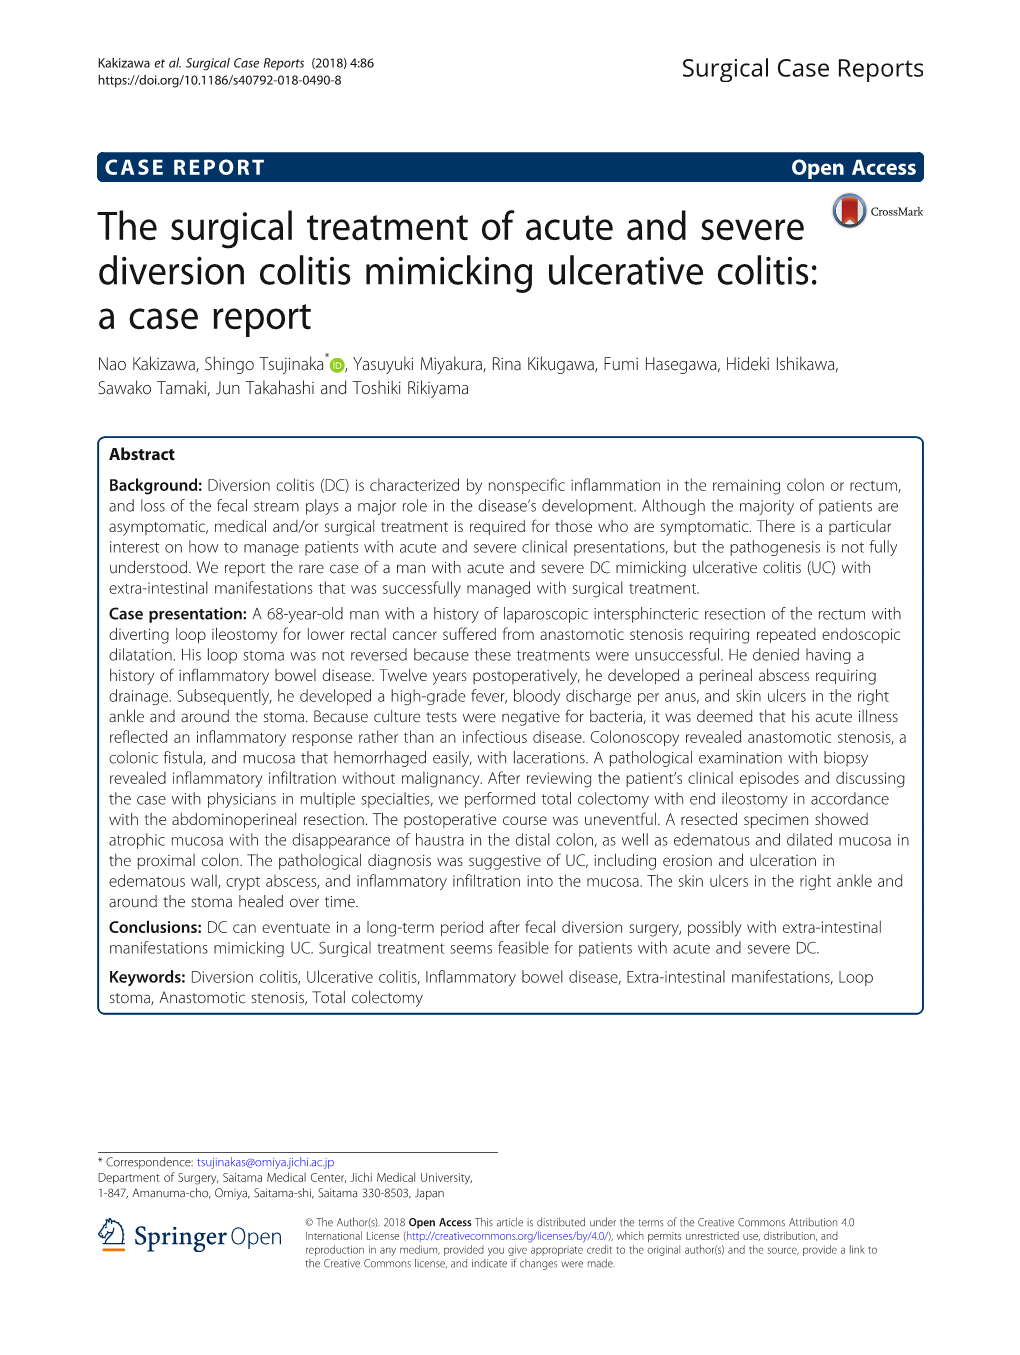 The Surgical Treatment of Acute and Severe Diversion Colitis Mimicking Ulcerative Colitis: a Case Report